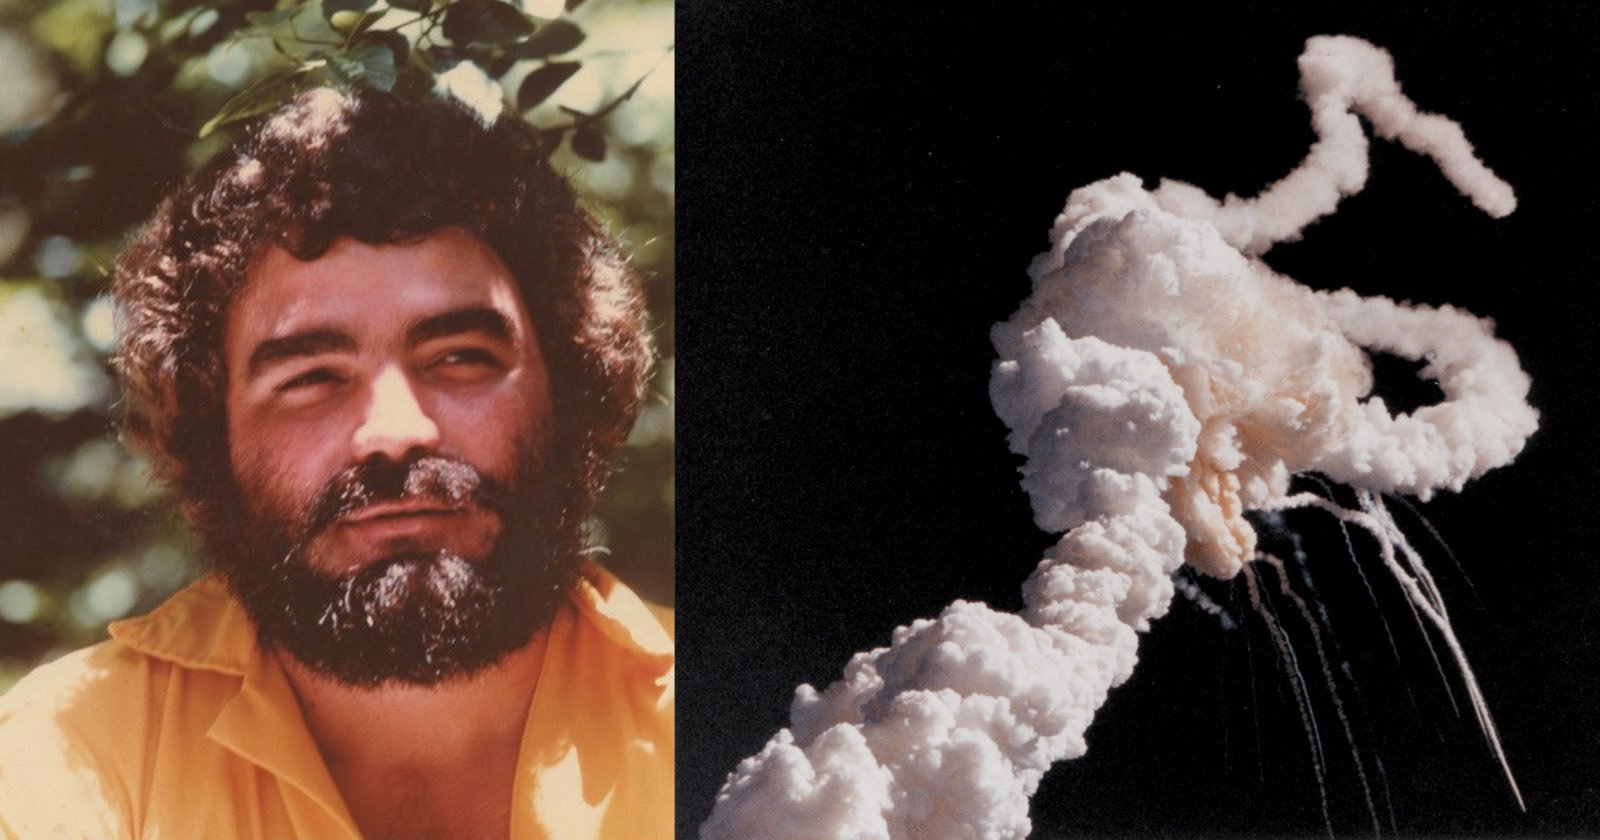  photographer who shot iconic image challenger disaster dies 